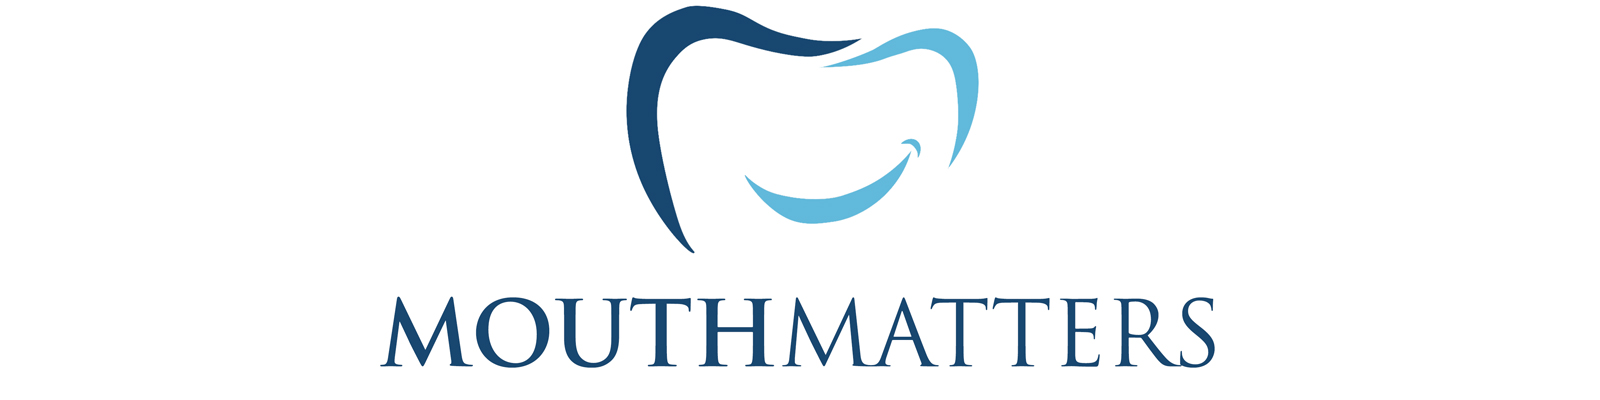 Logo of a tooth and mouth-matters.